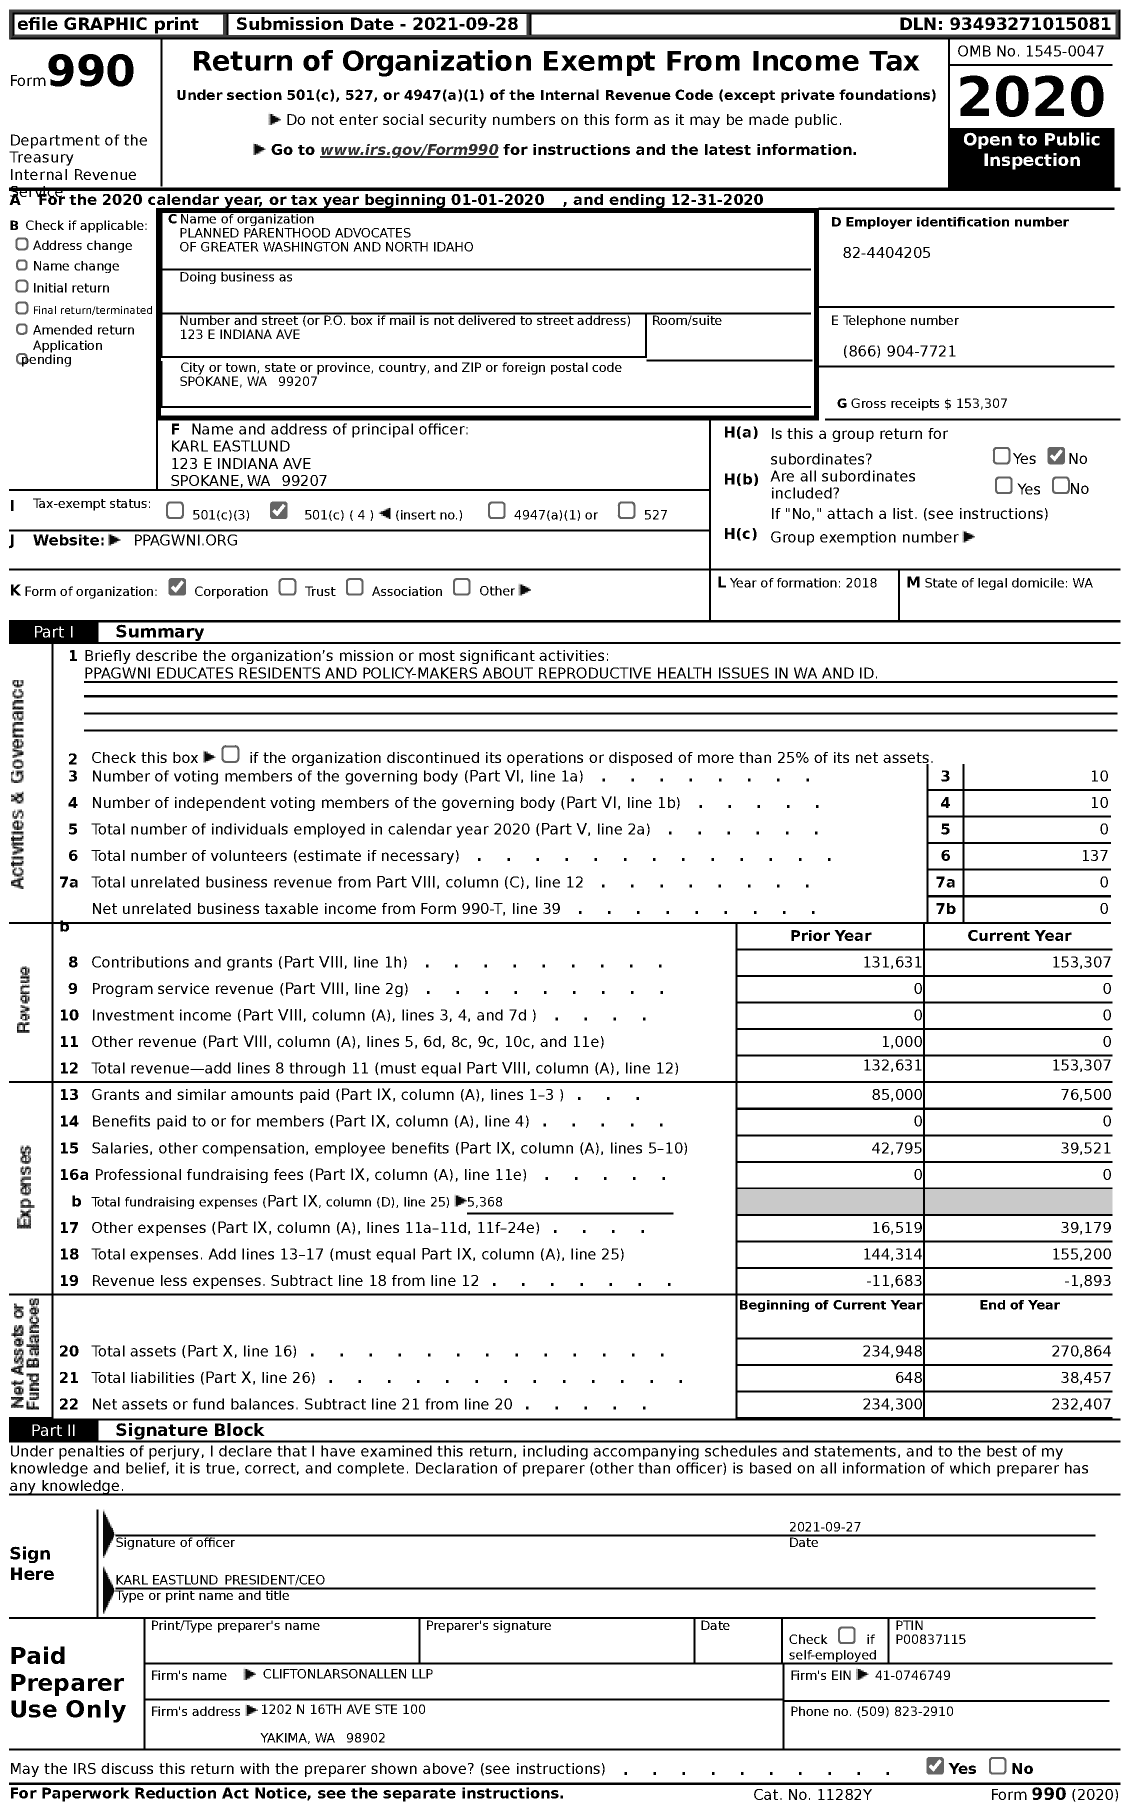 Image of first page of 2020 Form 990 for Planned Parenthood Advocates of Greater Washington and North Idaho